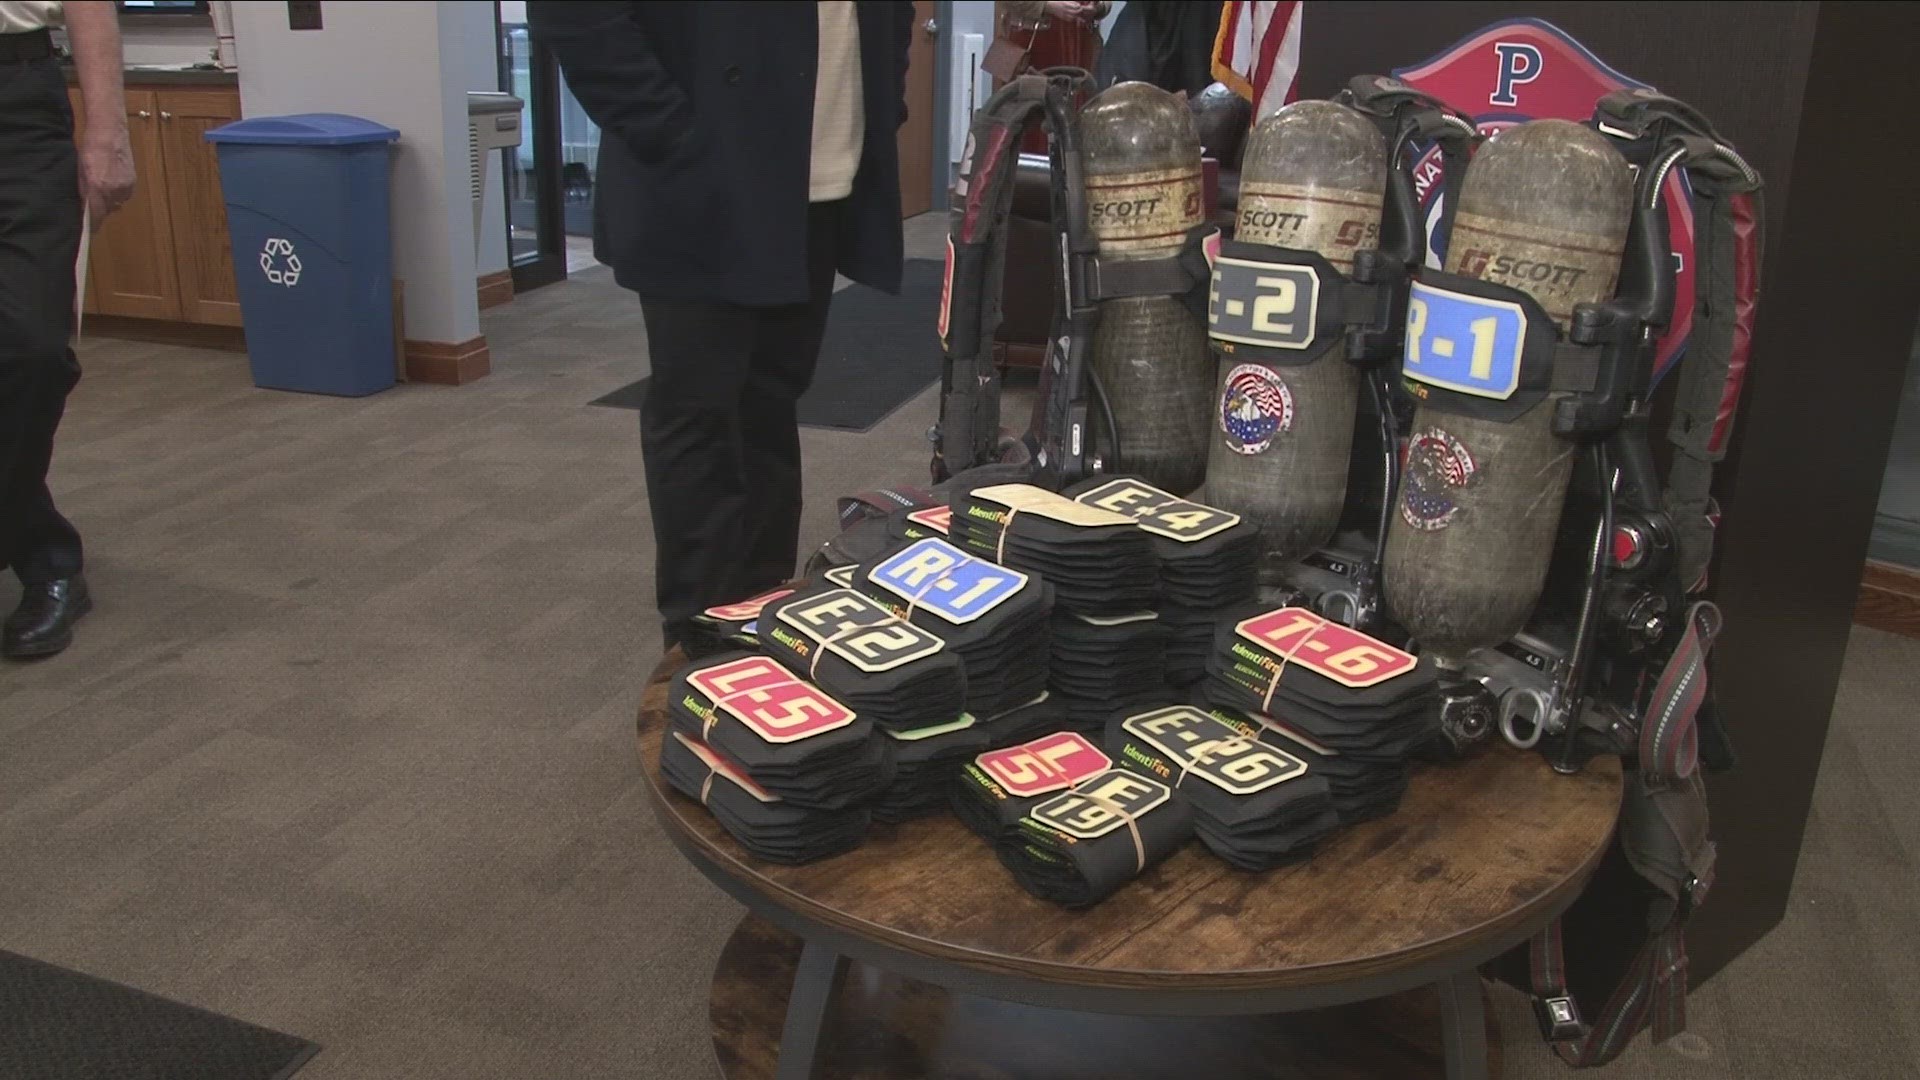 Safety equipment donated to Buffalo Fire department thanks to the Firefighter Arno Memorial Foundation